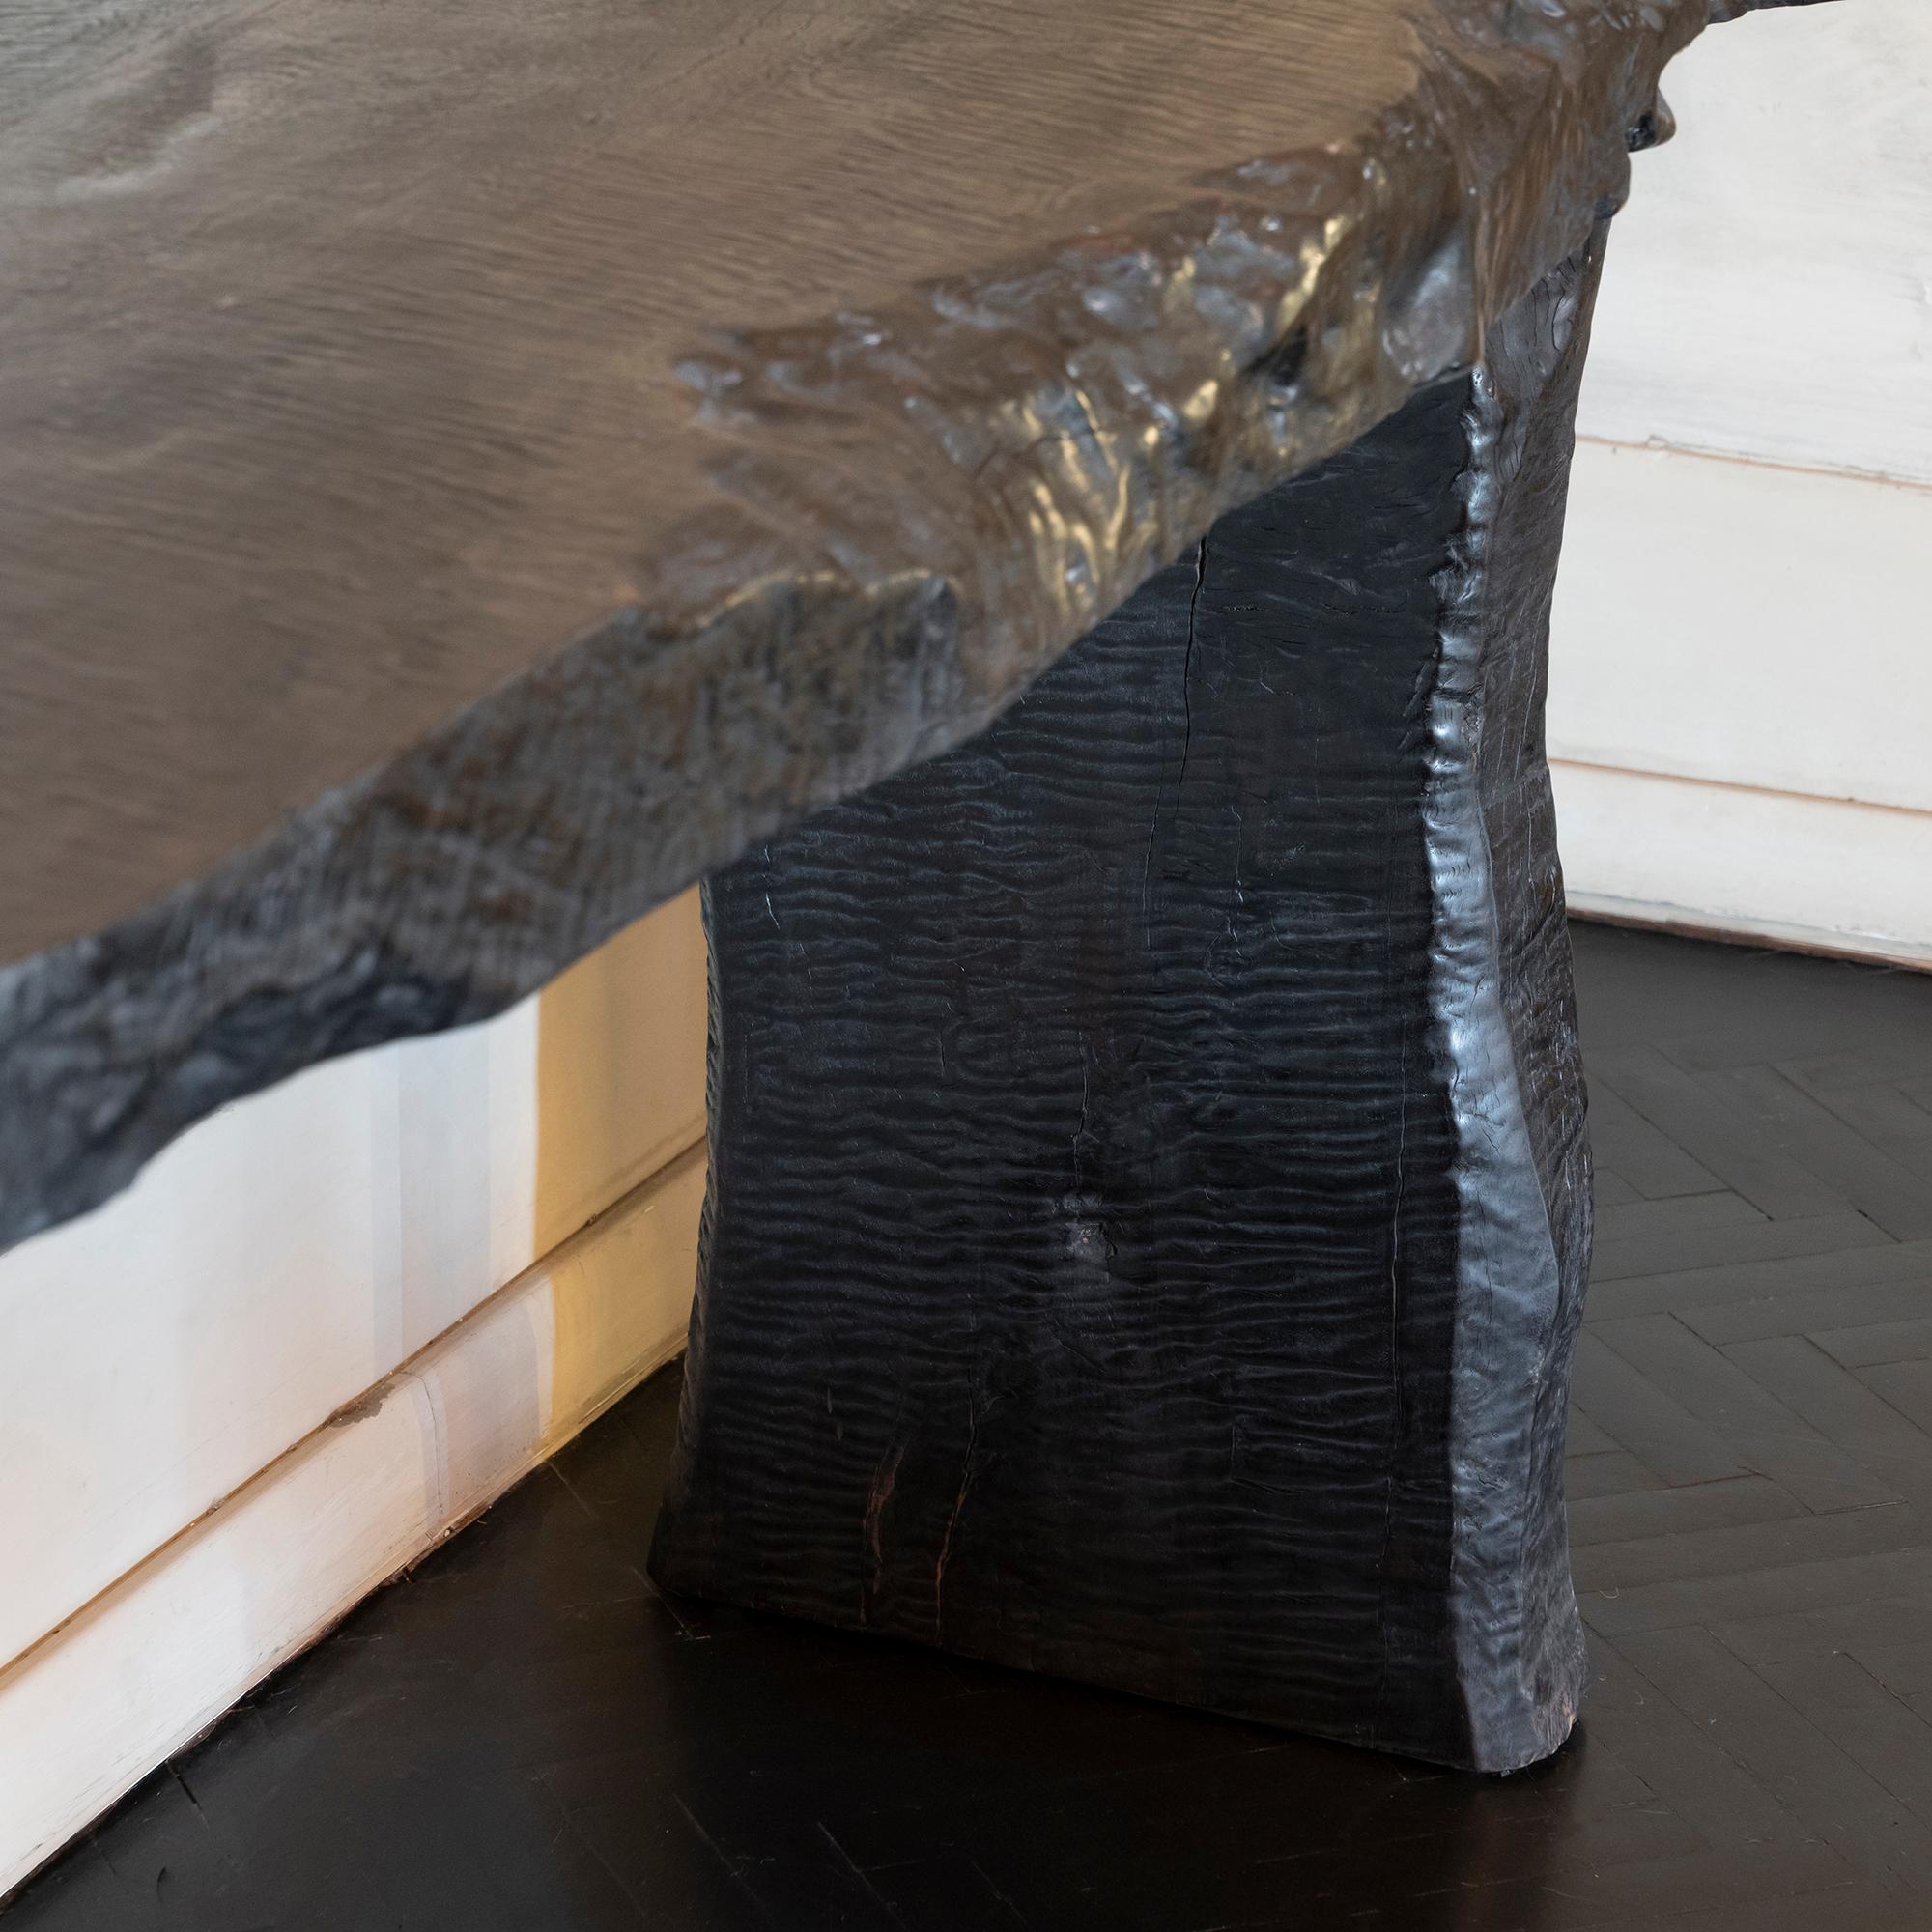 Sculptural Charred Suar wood console, Suar is an Indonesian wood, charred wood – an ancient Japanese technique, is the process of lightly applying open flame to a wood plank to char the surface, Indonesia, 2018.